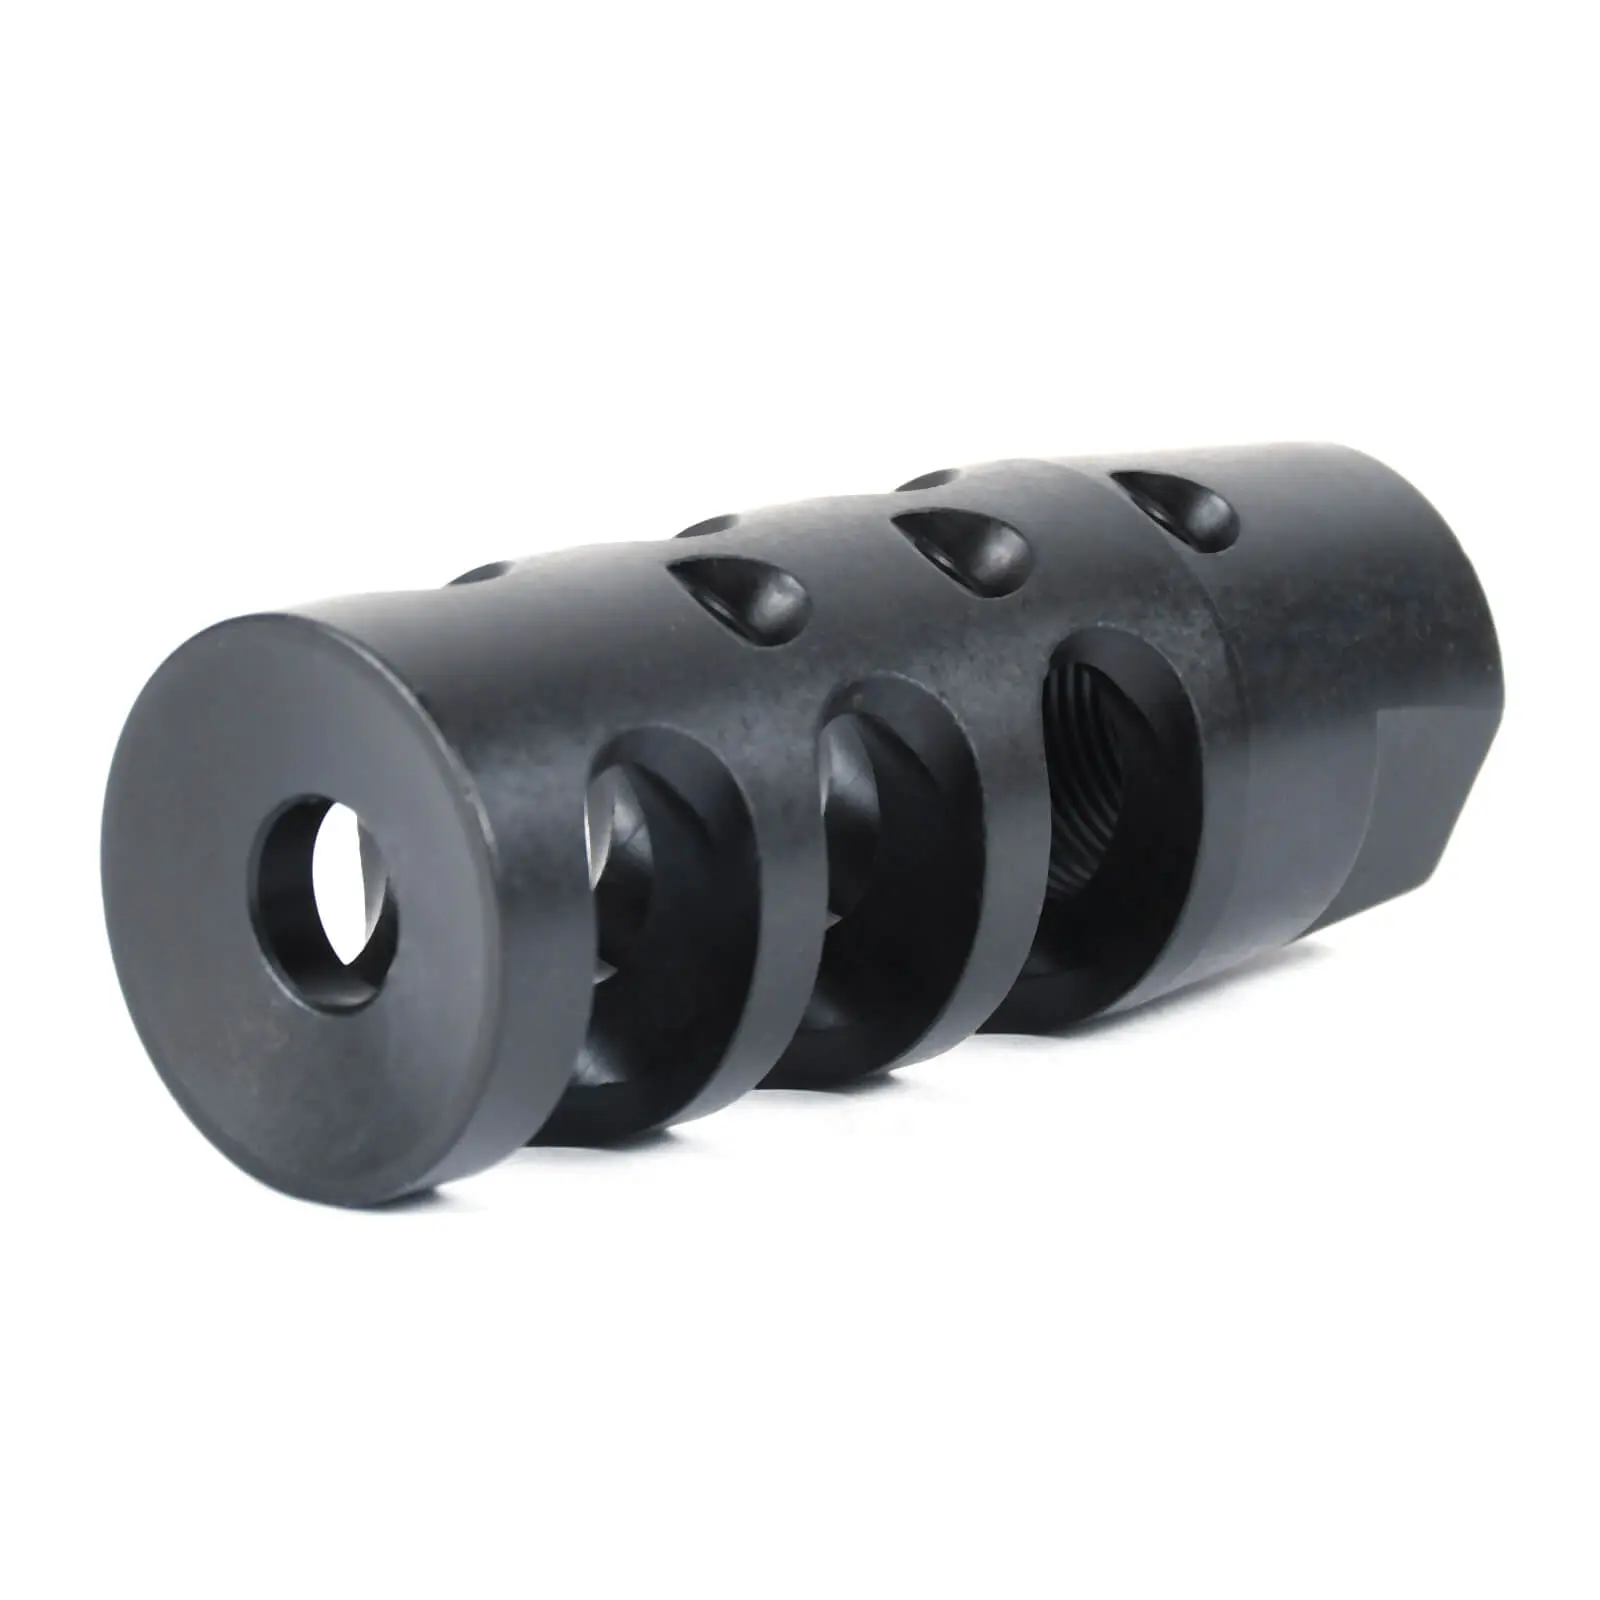 AT3™ AR-15 3-Port Muzzle Brake with Crush Washer – 5/8×24 Thread for .300 BLK/.308 WIN